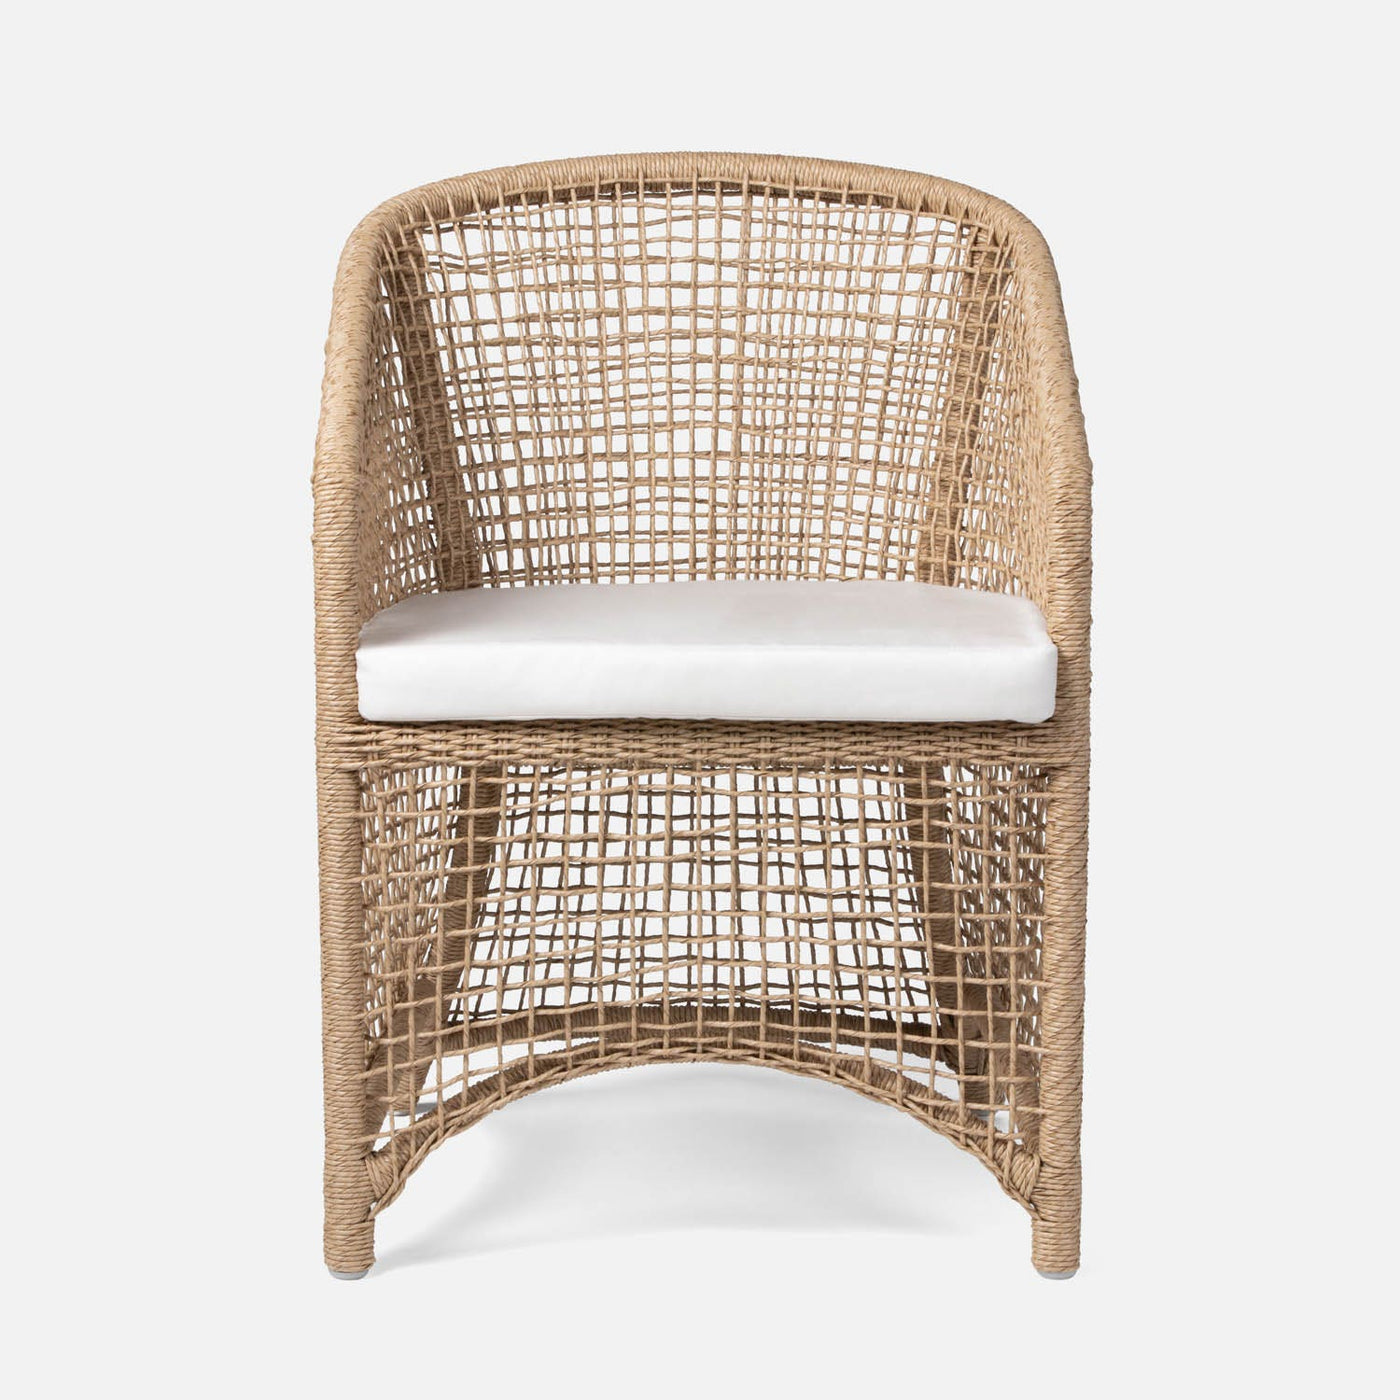 CHAIR DINING NATURAL TWISTED WICKER